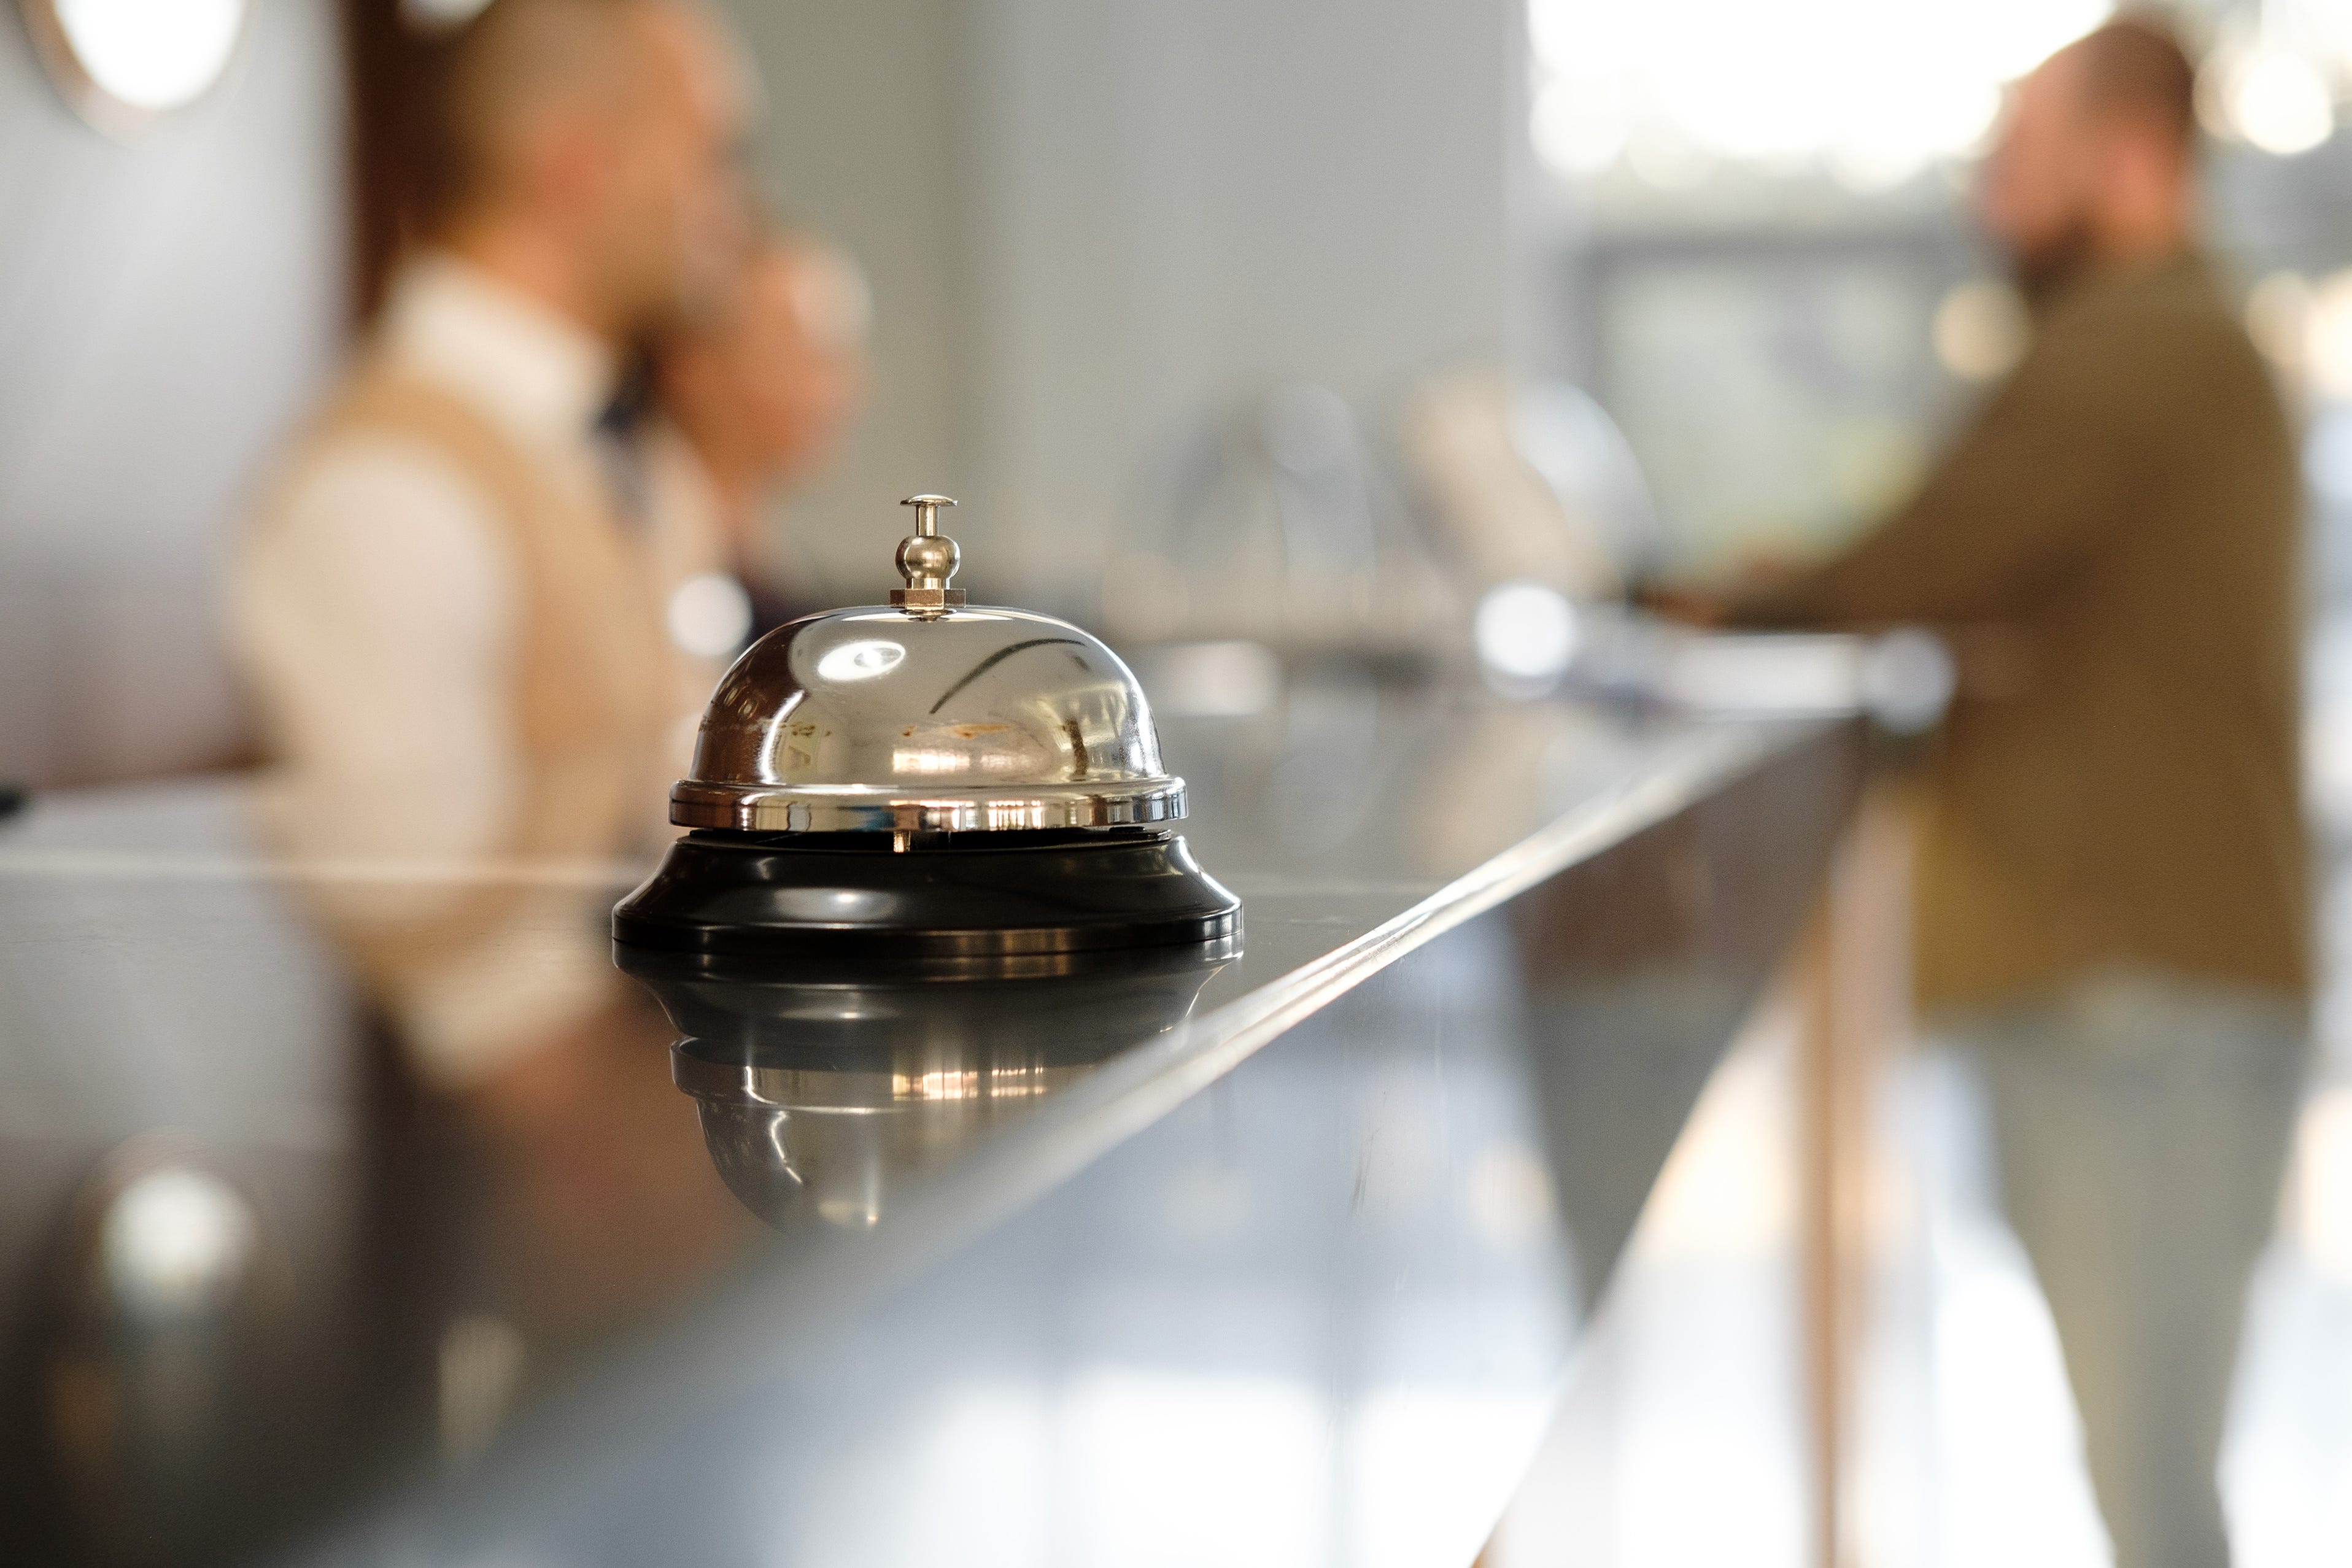 How do hotels deal with problems? Common issues and what guests can expect in exchange